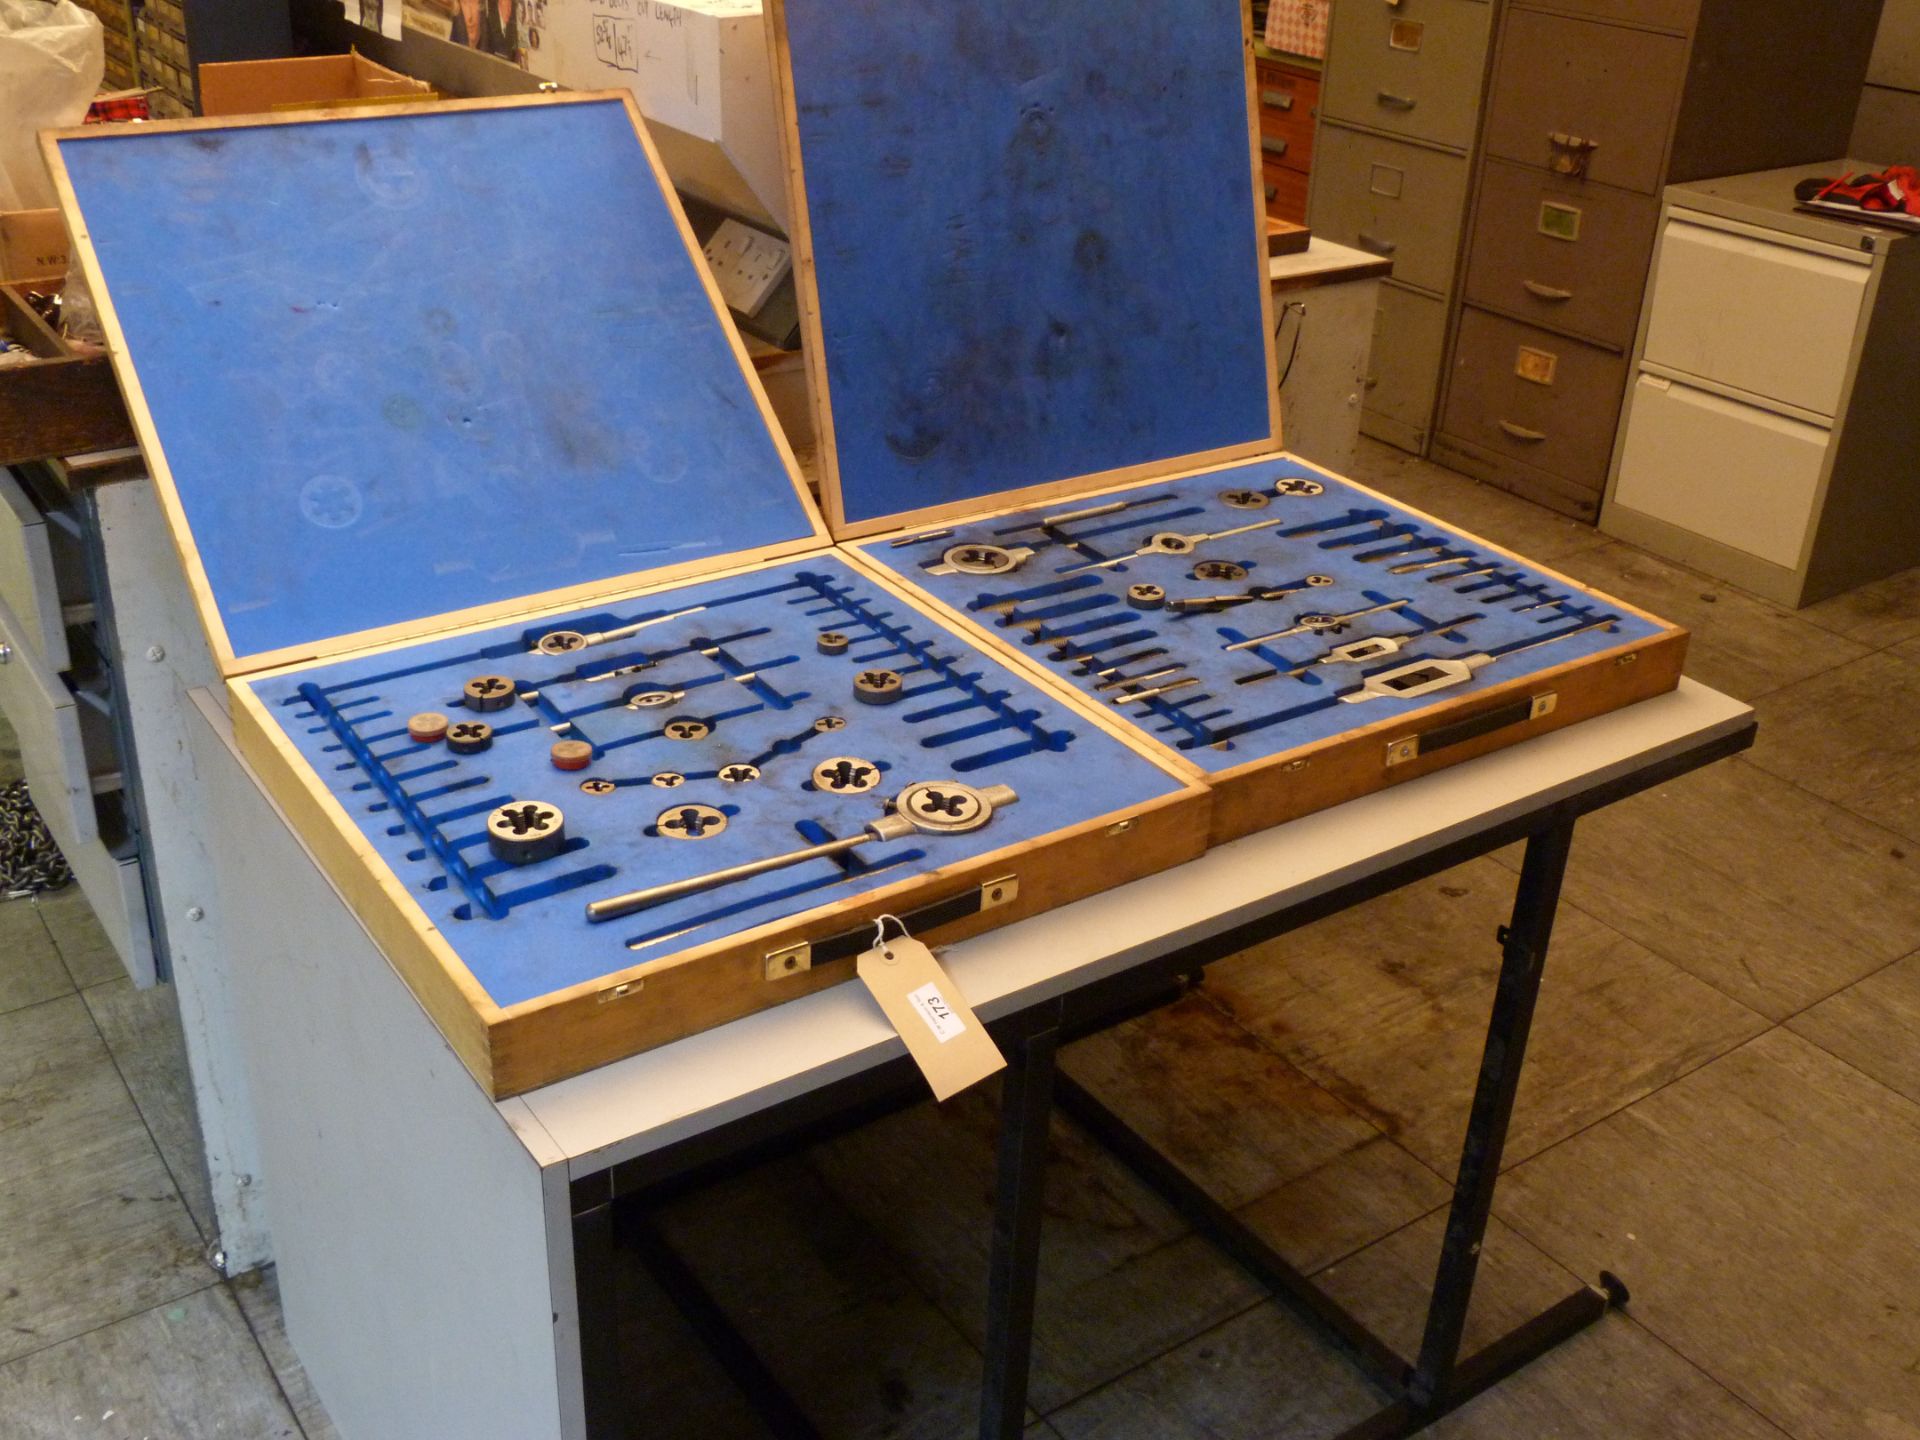 Two tap and die sets in wooden cases - one metric and one BSW